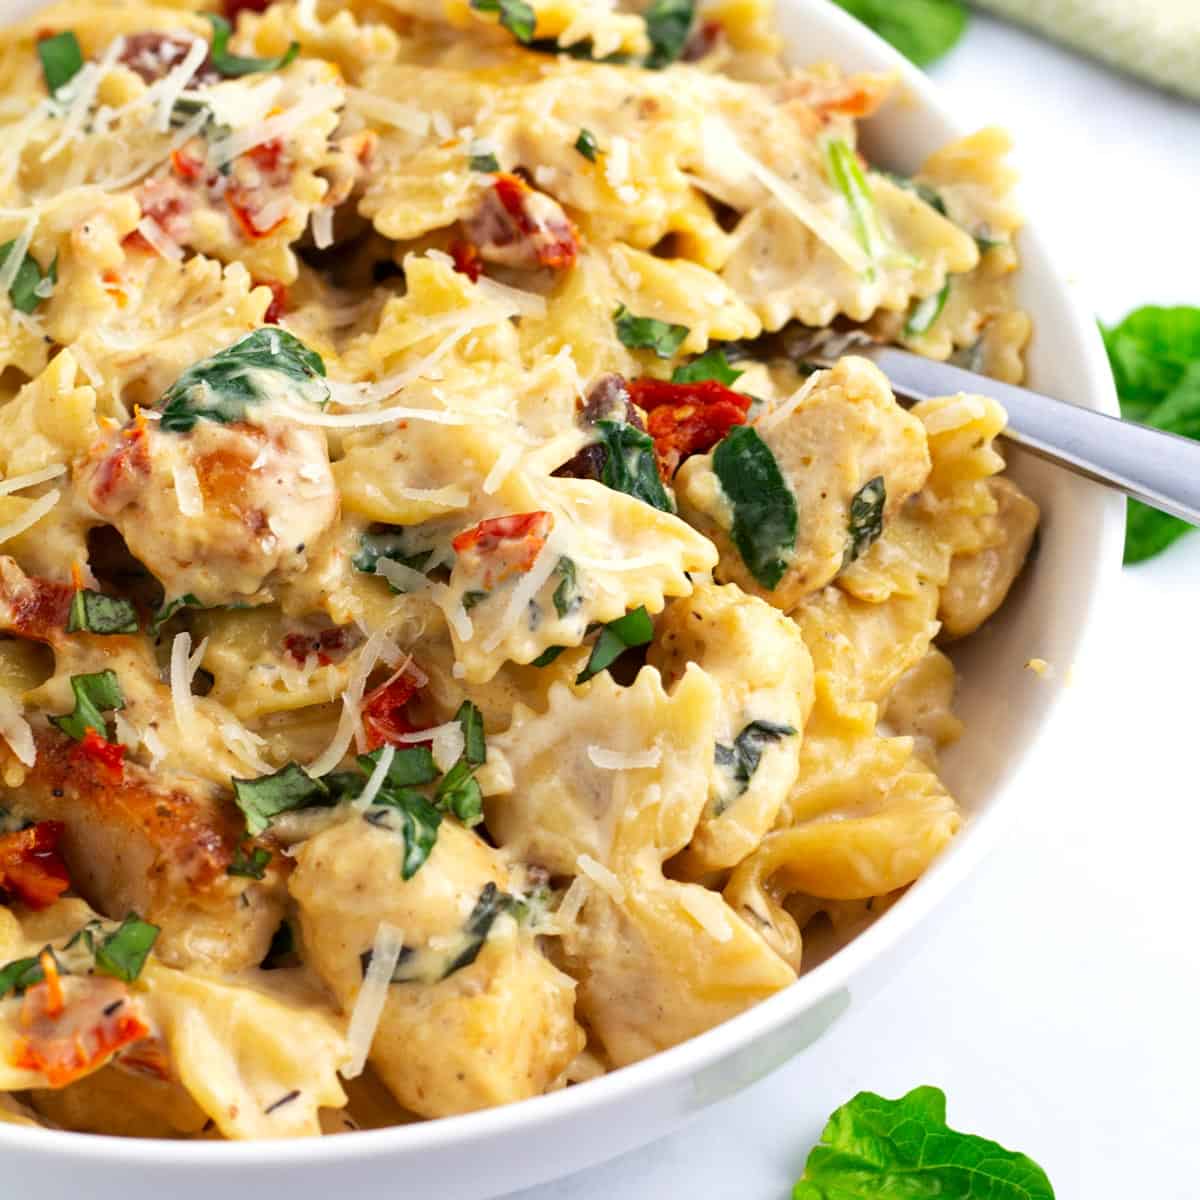 Marry Me Chicken Pasta filled with tender chicken, sun-dried tomatoes, basil, and parmesan cheese in a creamy sauce on serving plate.